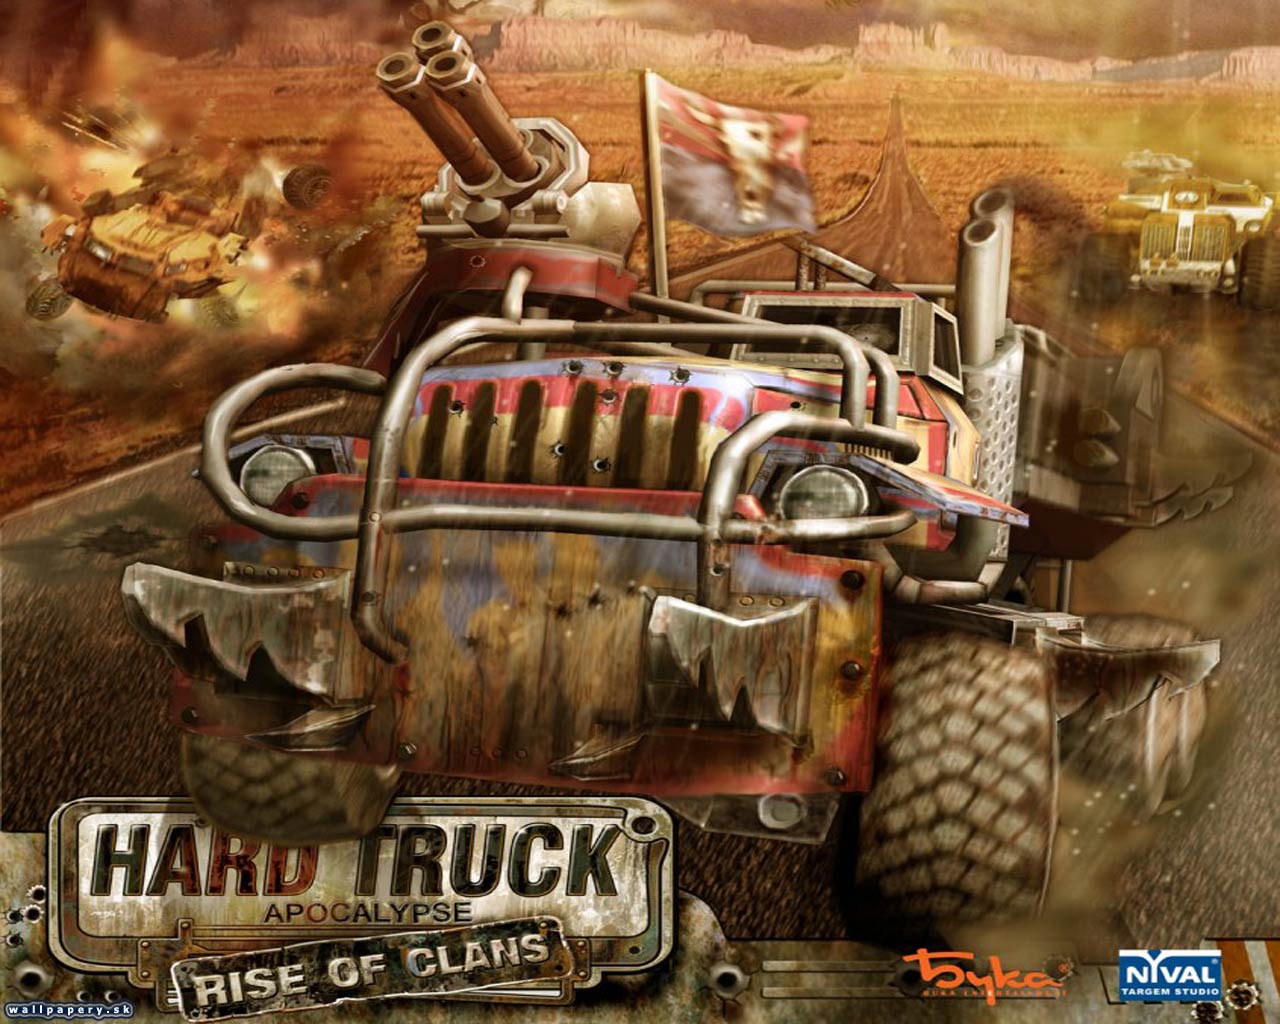 Hard Truck: Apocalypse - Rise of Clans - wallpaper 1